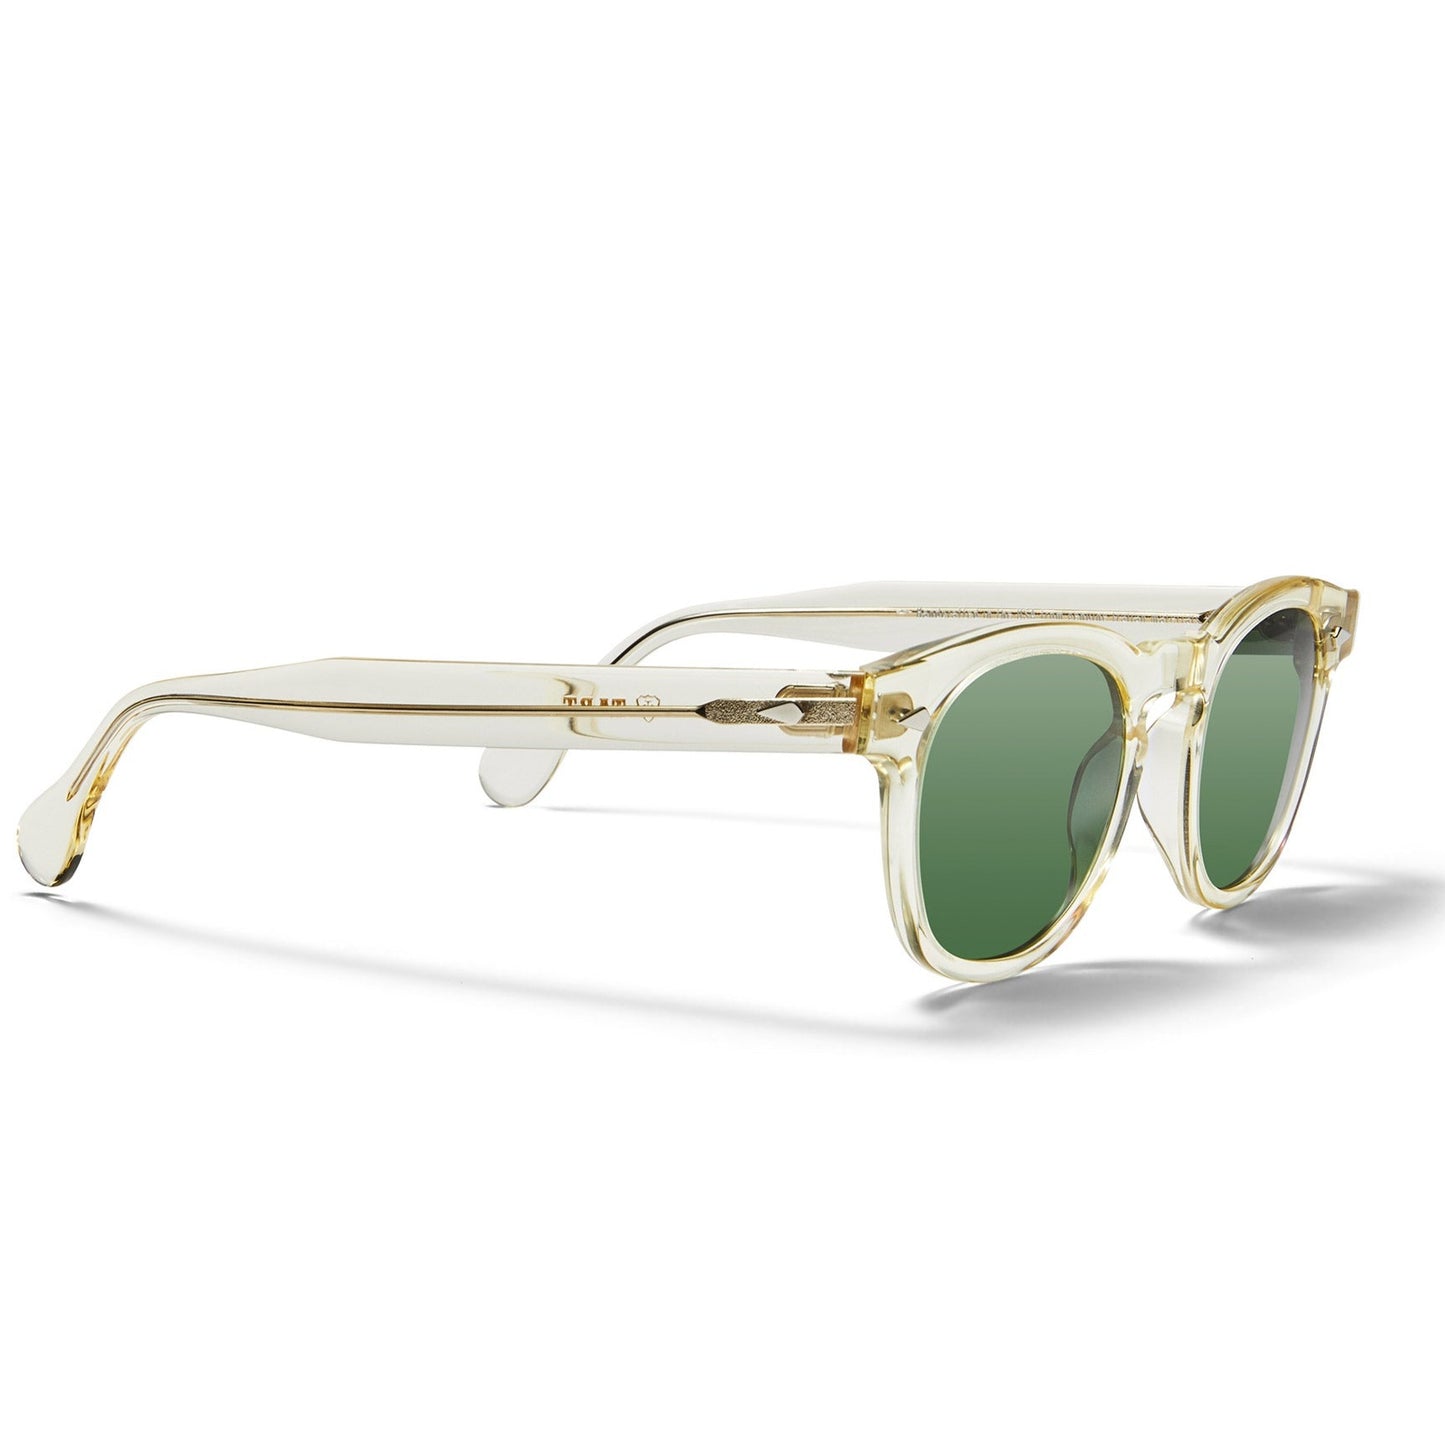 A side view of the champaign Arnel USA sunglass frame—the Vintage eyewear. 